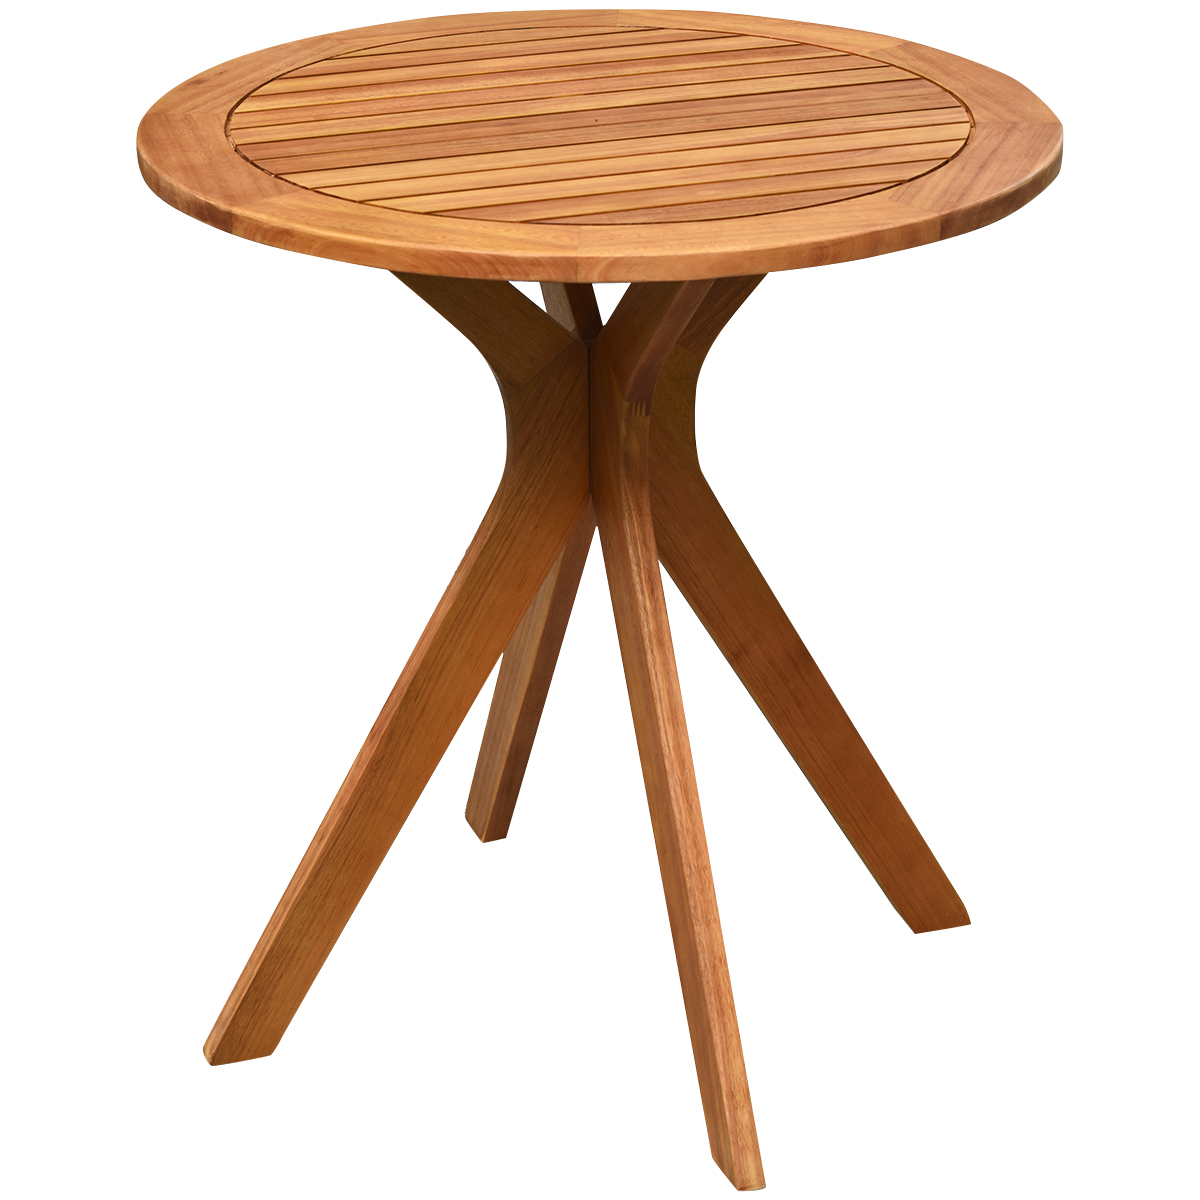 70cm Round Wooden Table with X Base